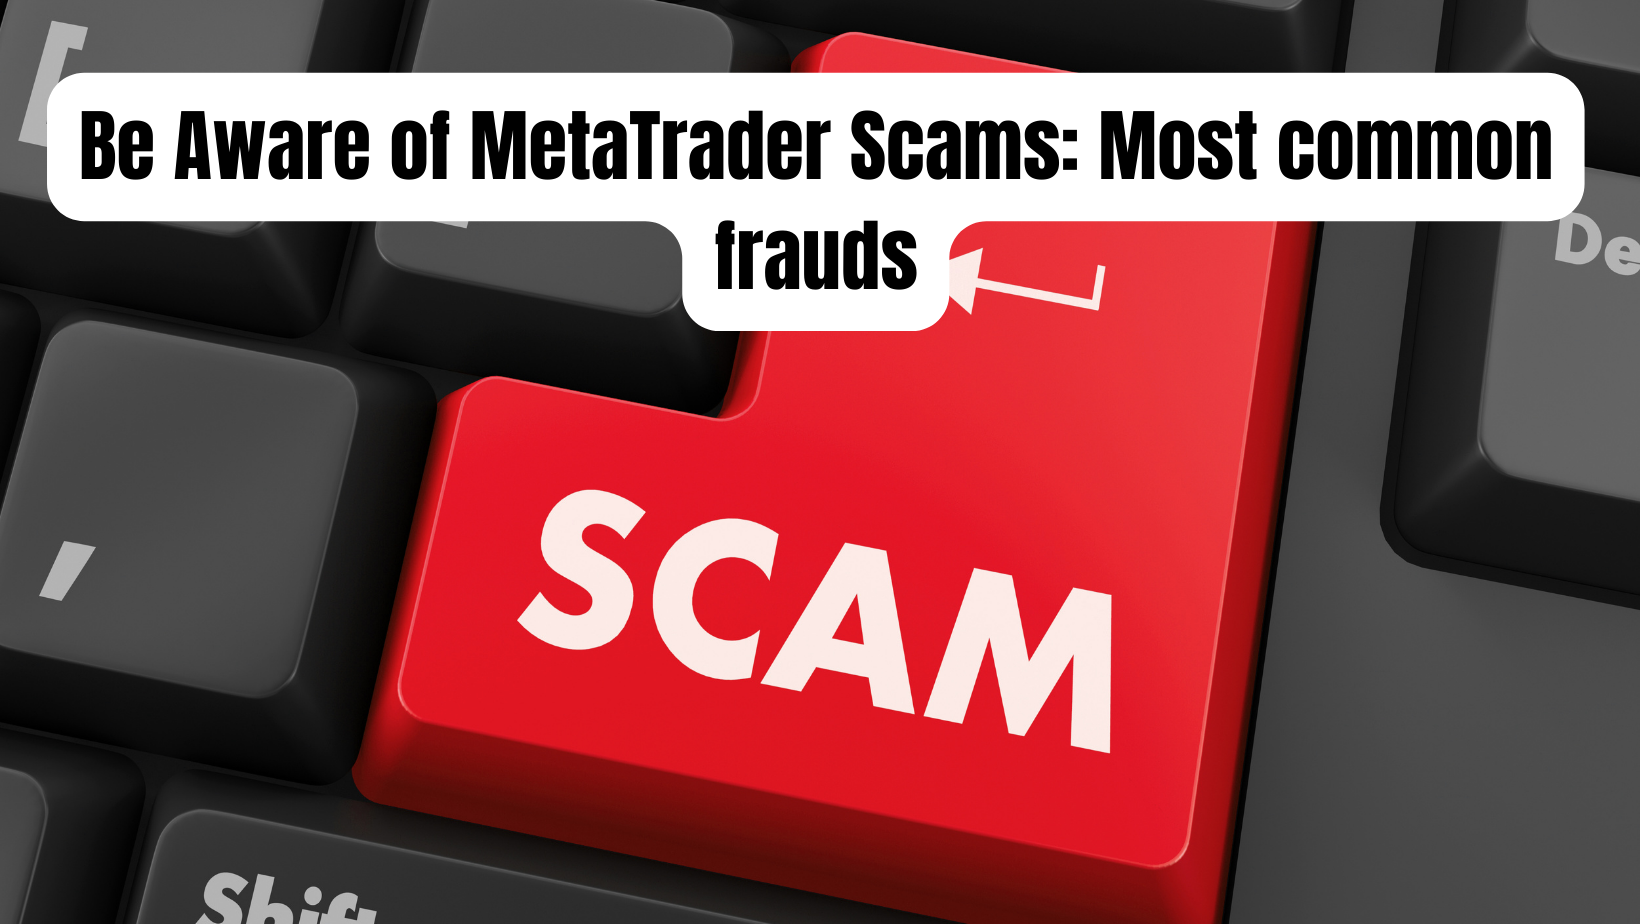 Be Aware of MetaTrader Scams: Most common frauds